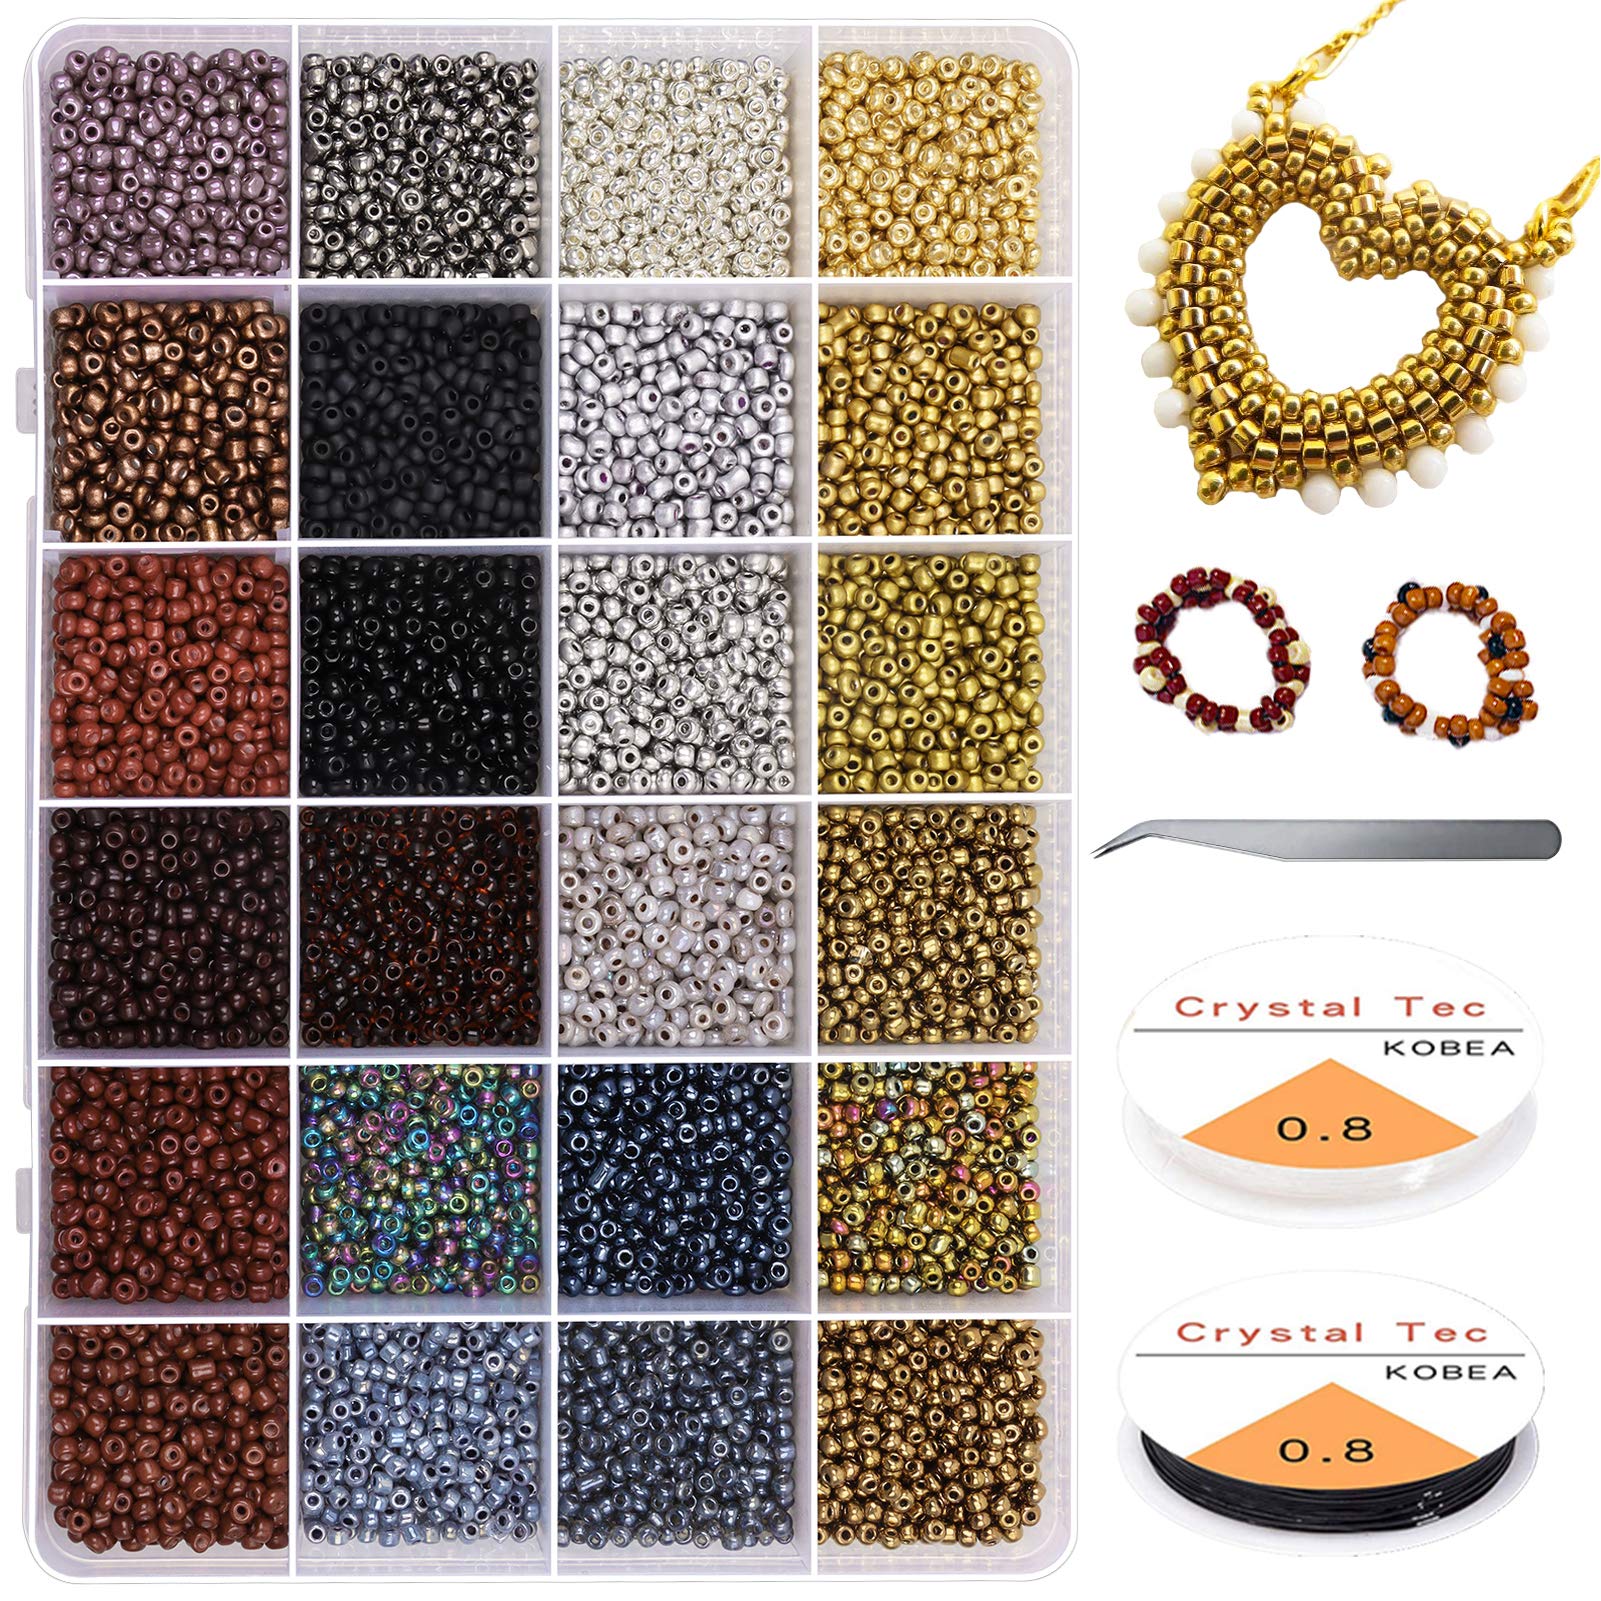 Seed Beads for Bracelets, 24 Colors 3mm Colored Small Glass Beads